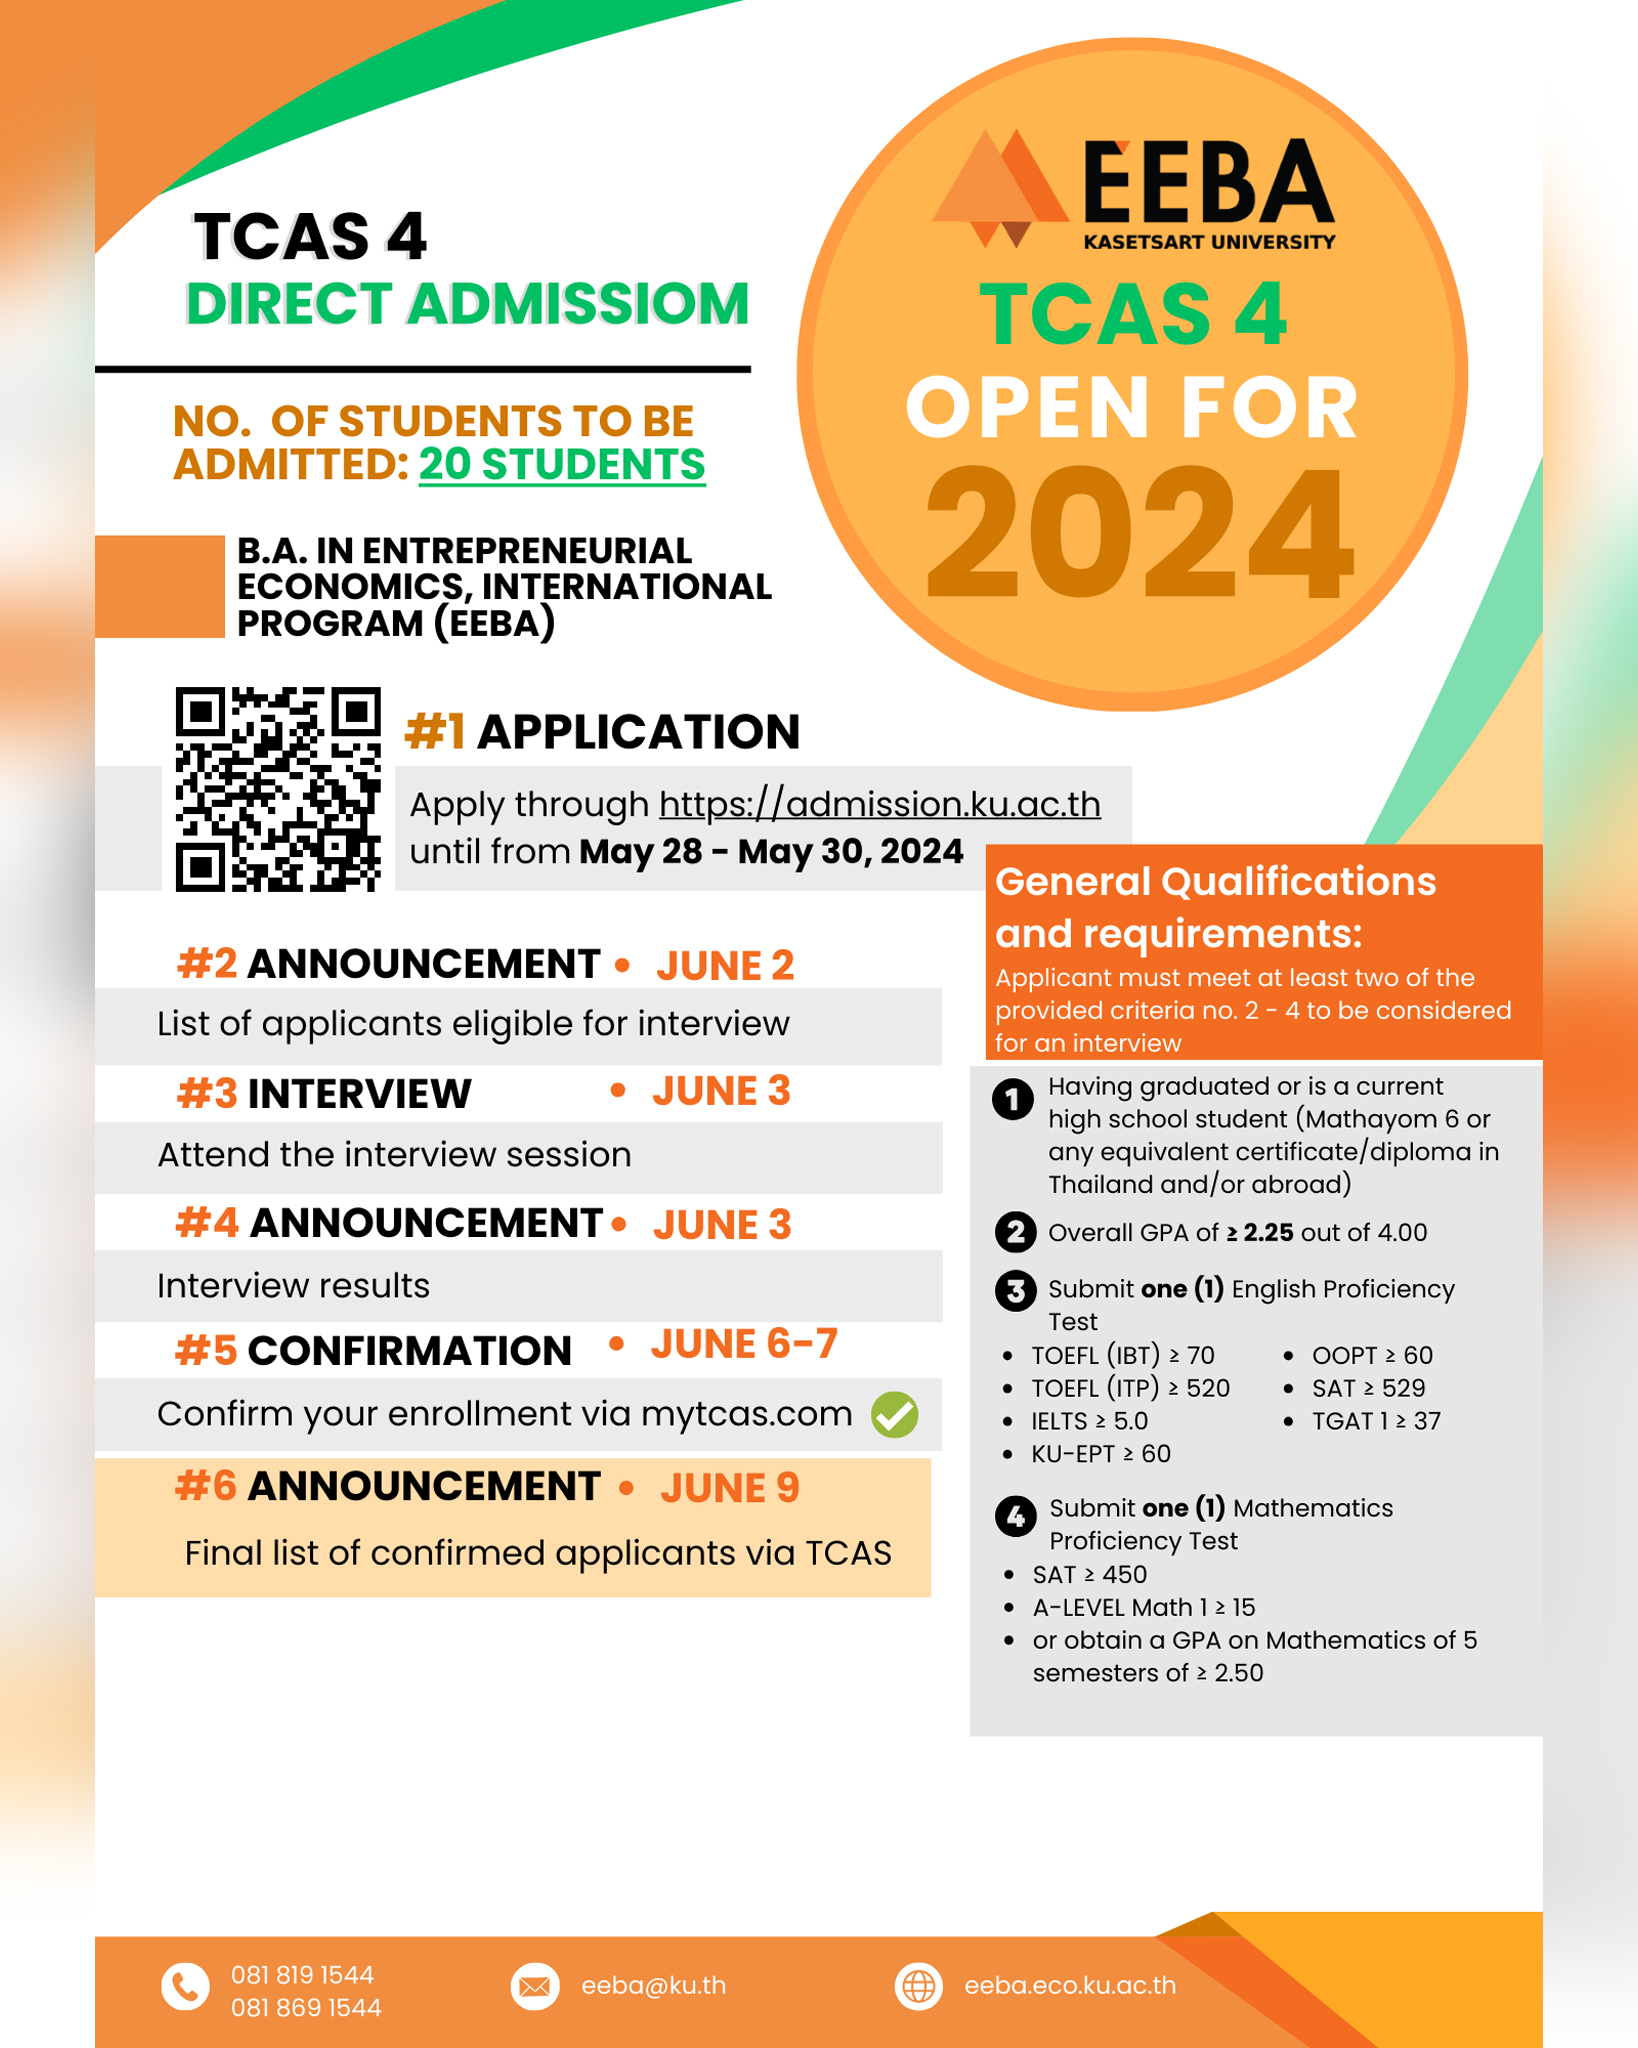 EEBA TCAS67 Round 4: The Application period, Qualifications, and Requirement